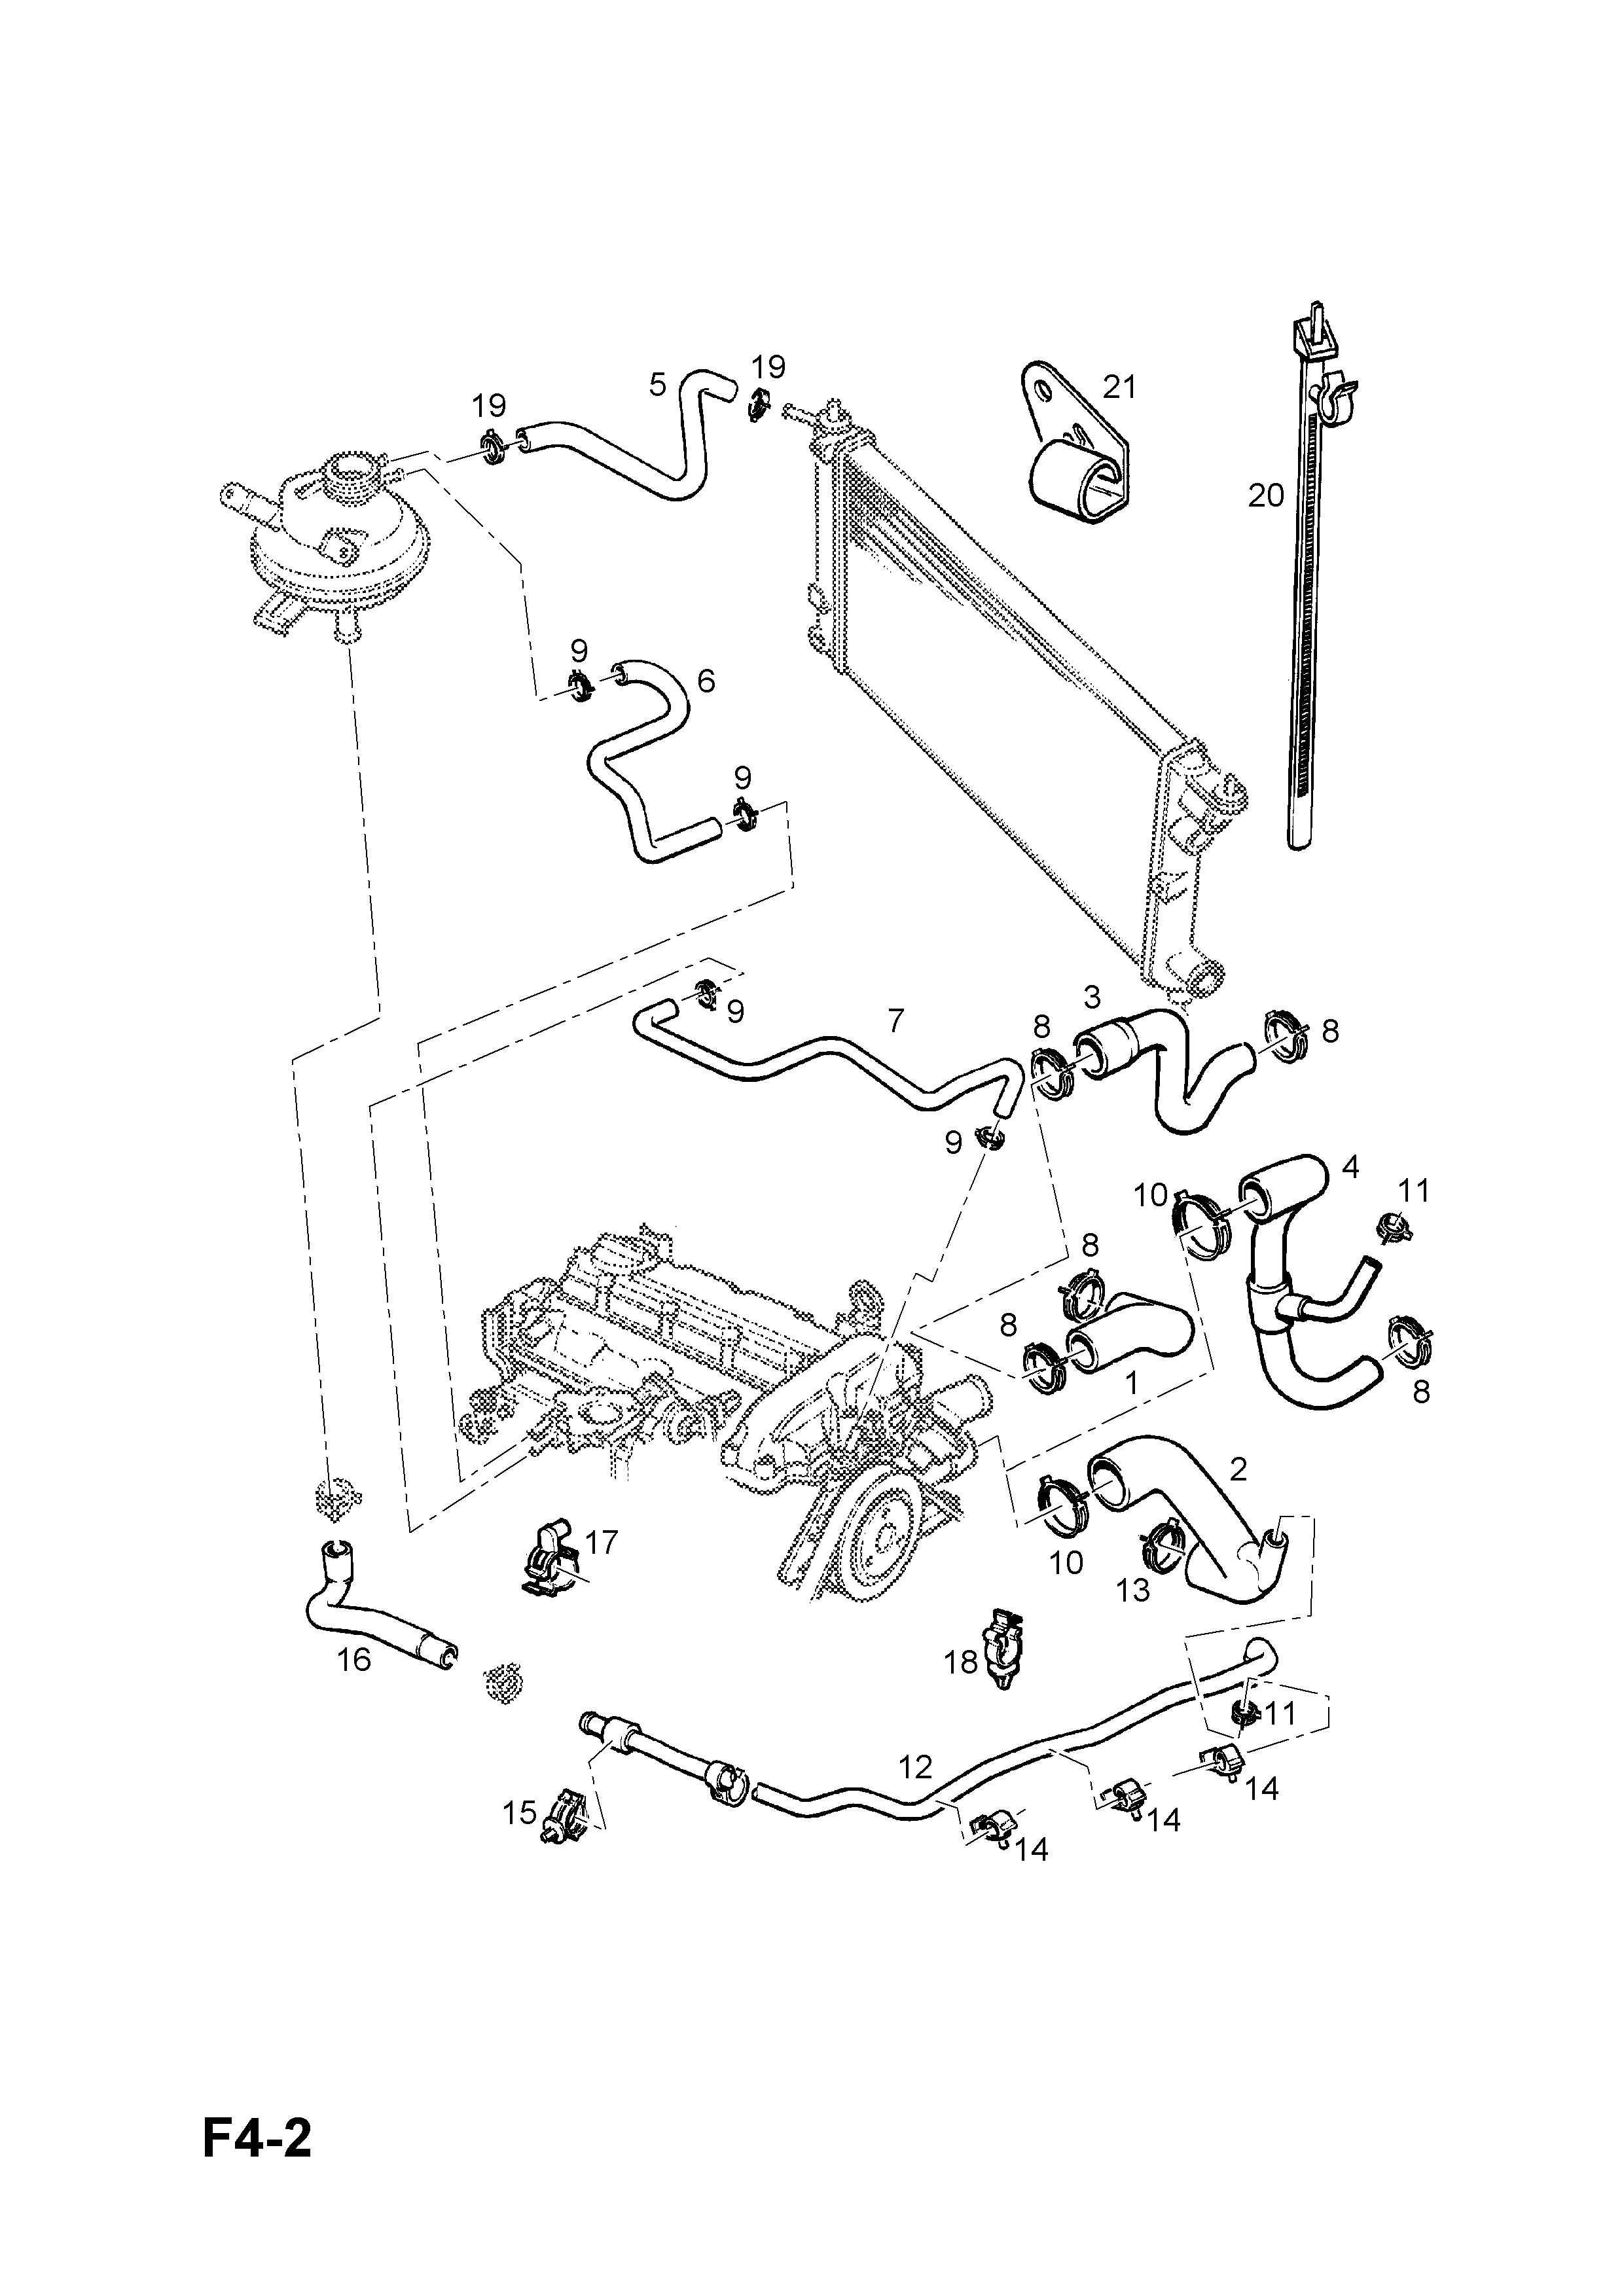 Car Radiator Parts Diagram Vauxhall Corsa B 1993 2002 F Cooling 13 Hoses and Pipes Of Car Radiator Parts Diagram